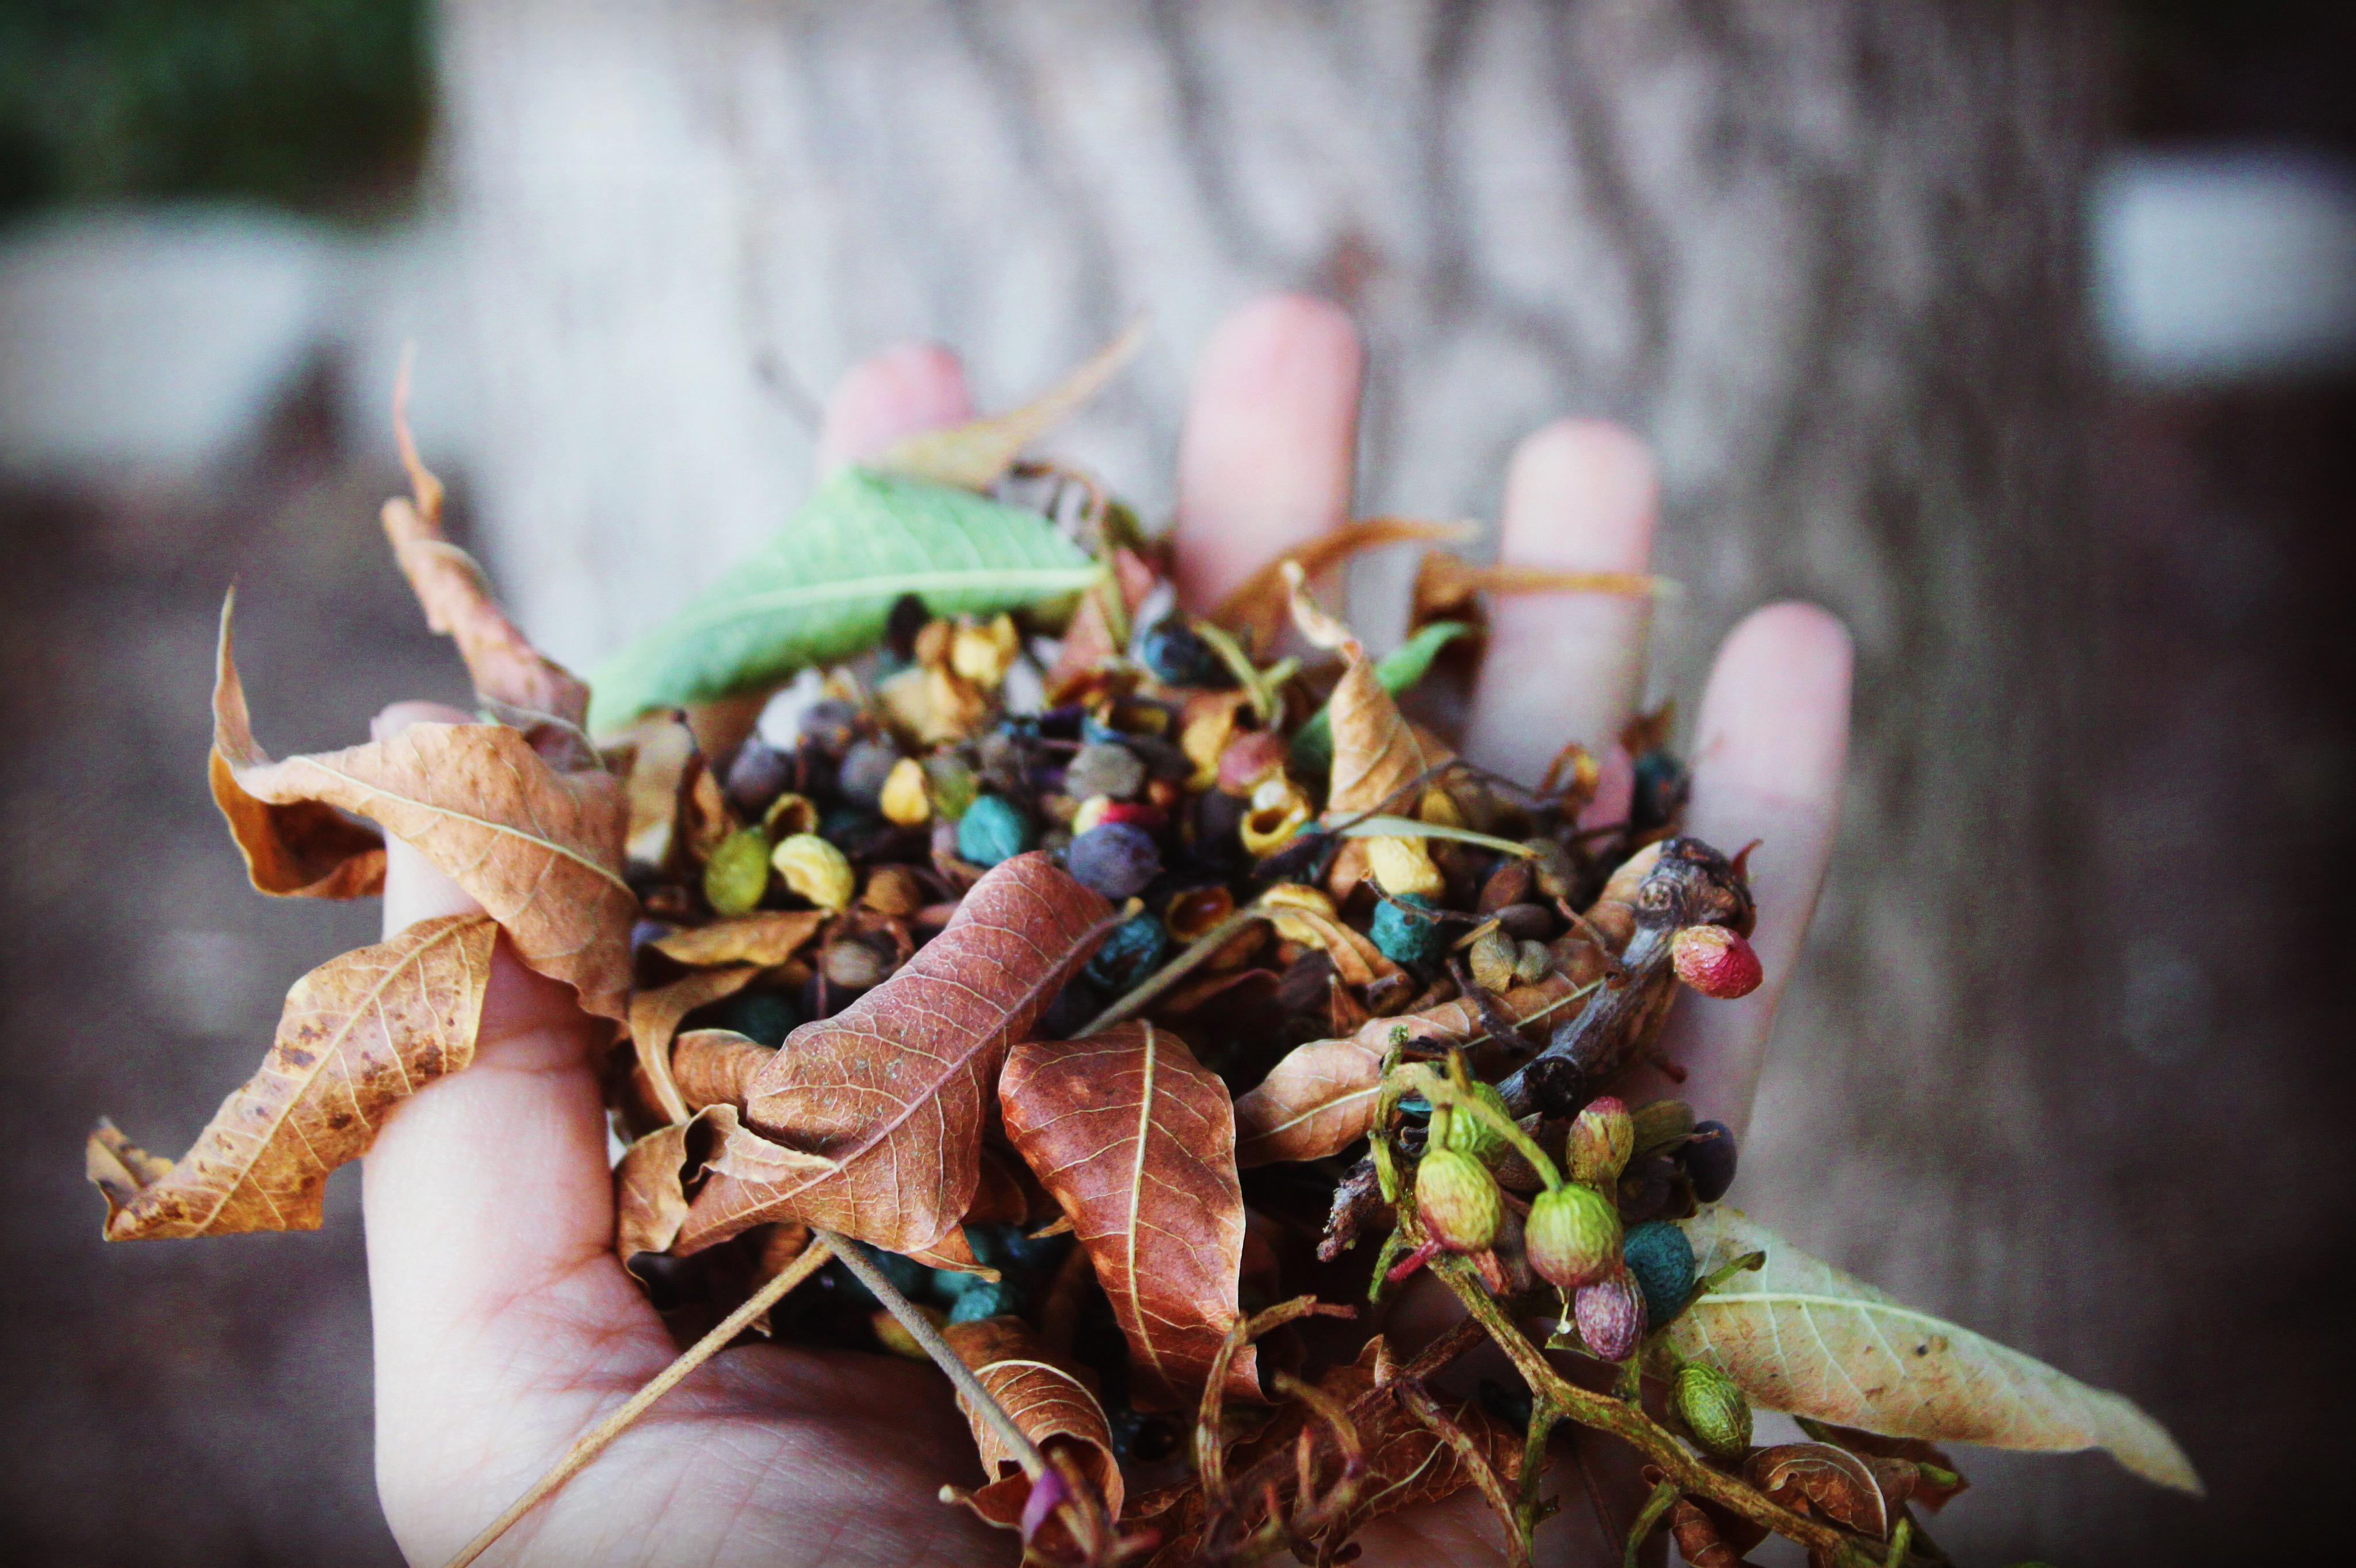 To Rake or Not to Rake? – The Benefits of Leaf Litter